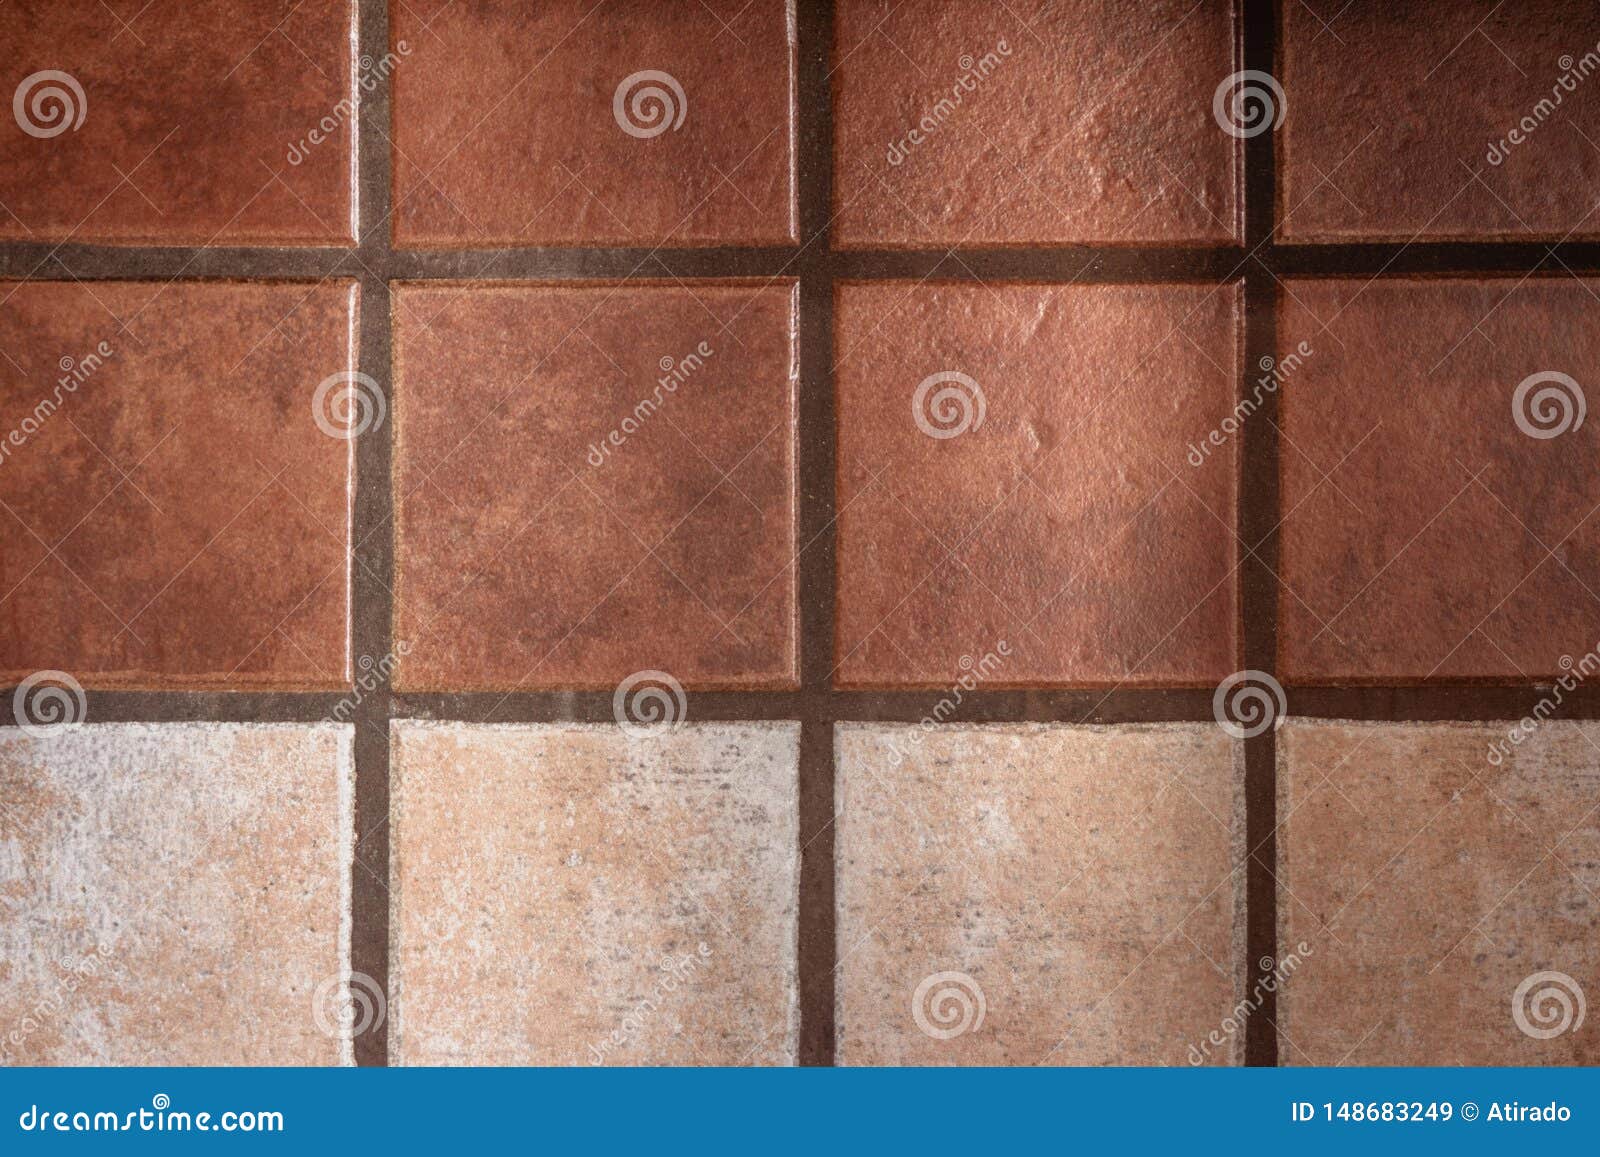 Rows of Rustic Tiles. a Clearer Row Adds Cadence. Stock Image - Image